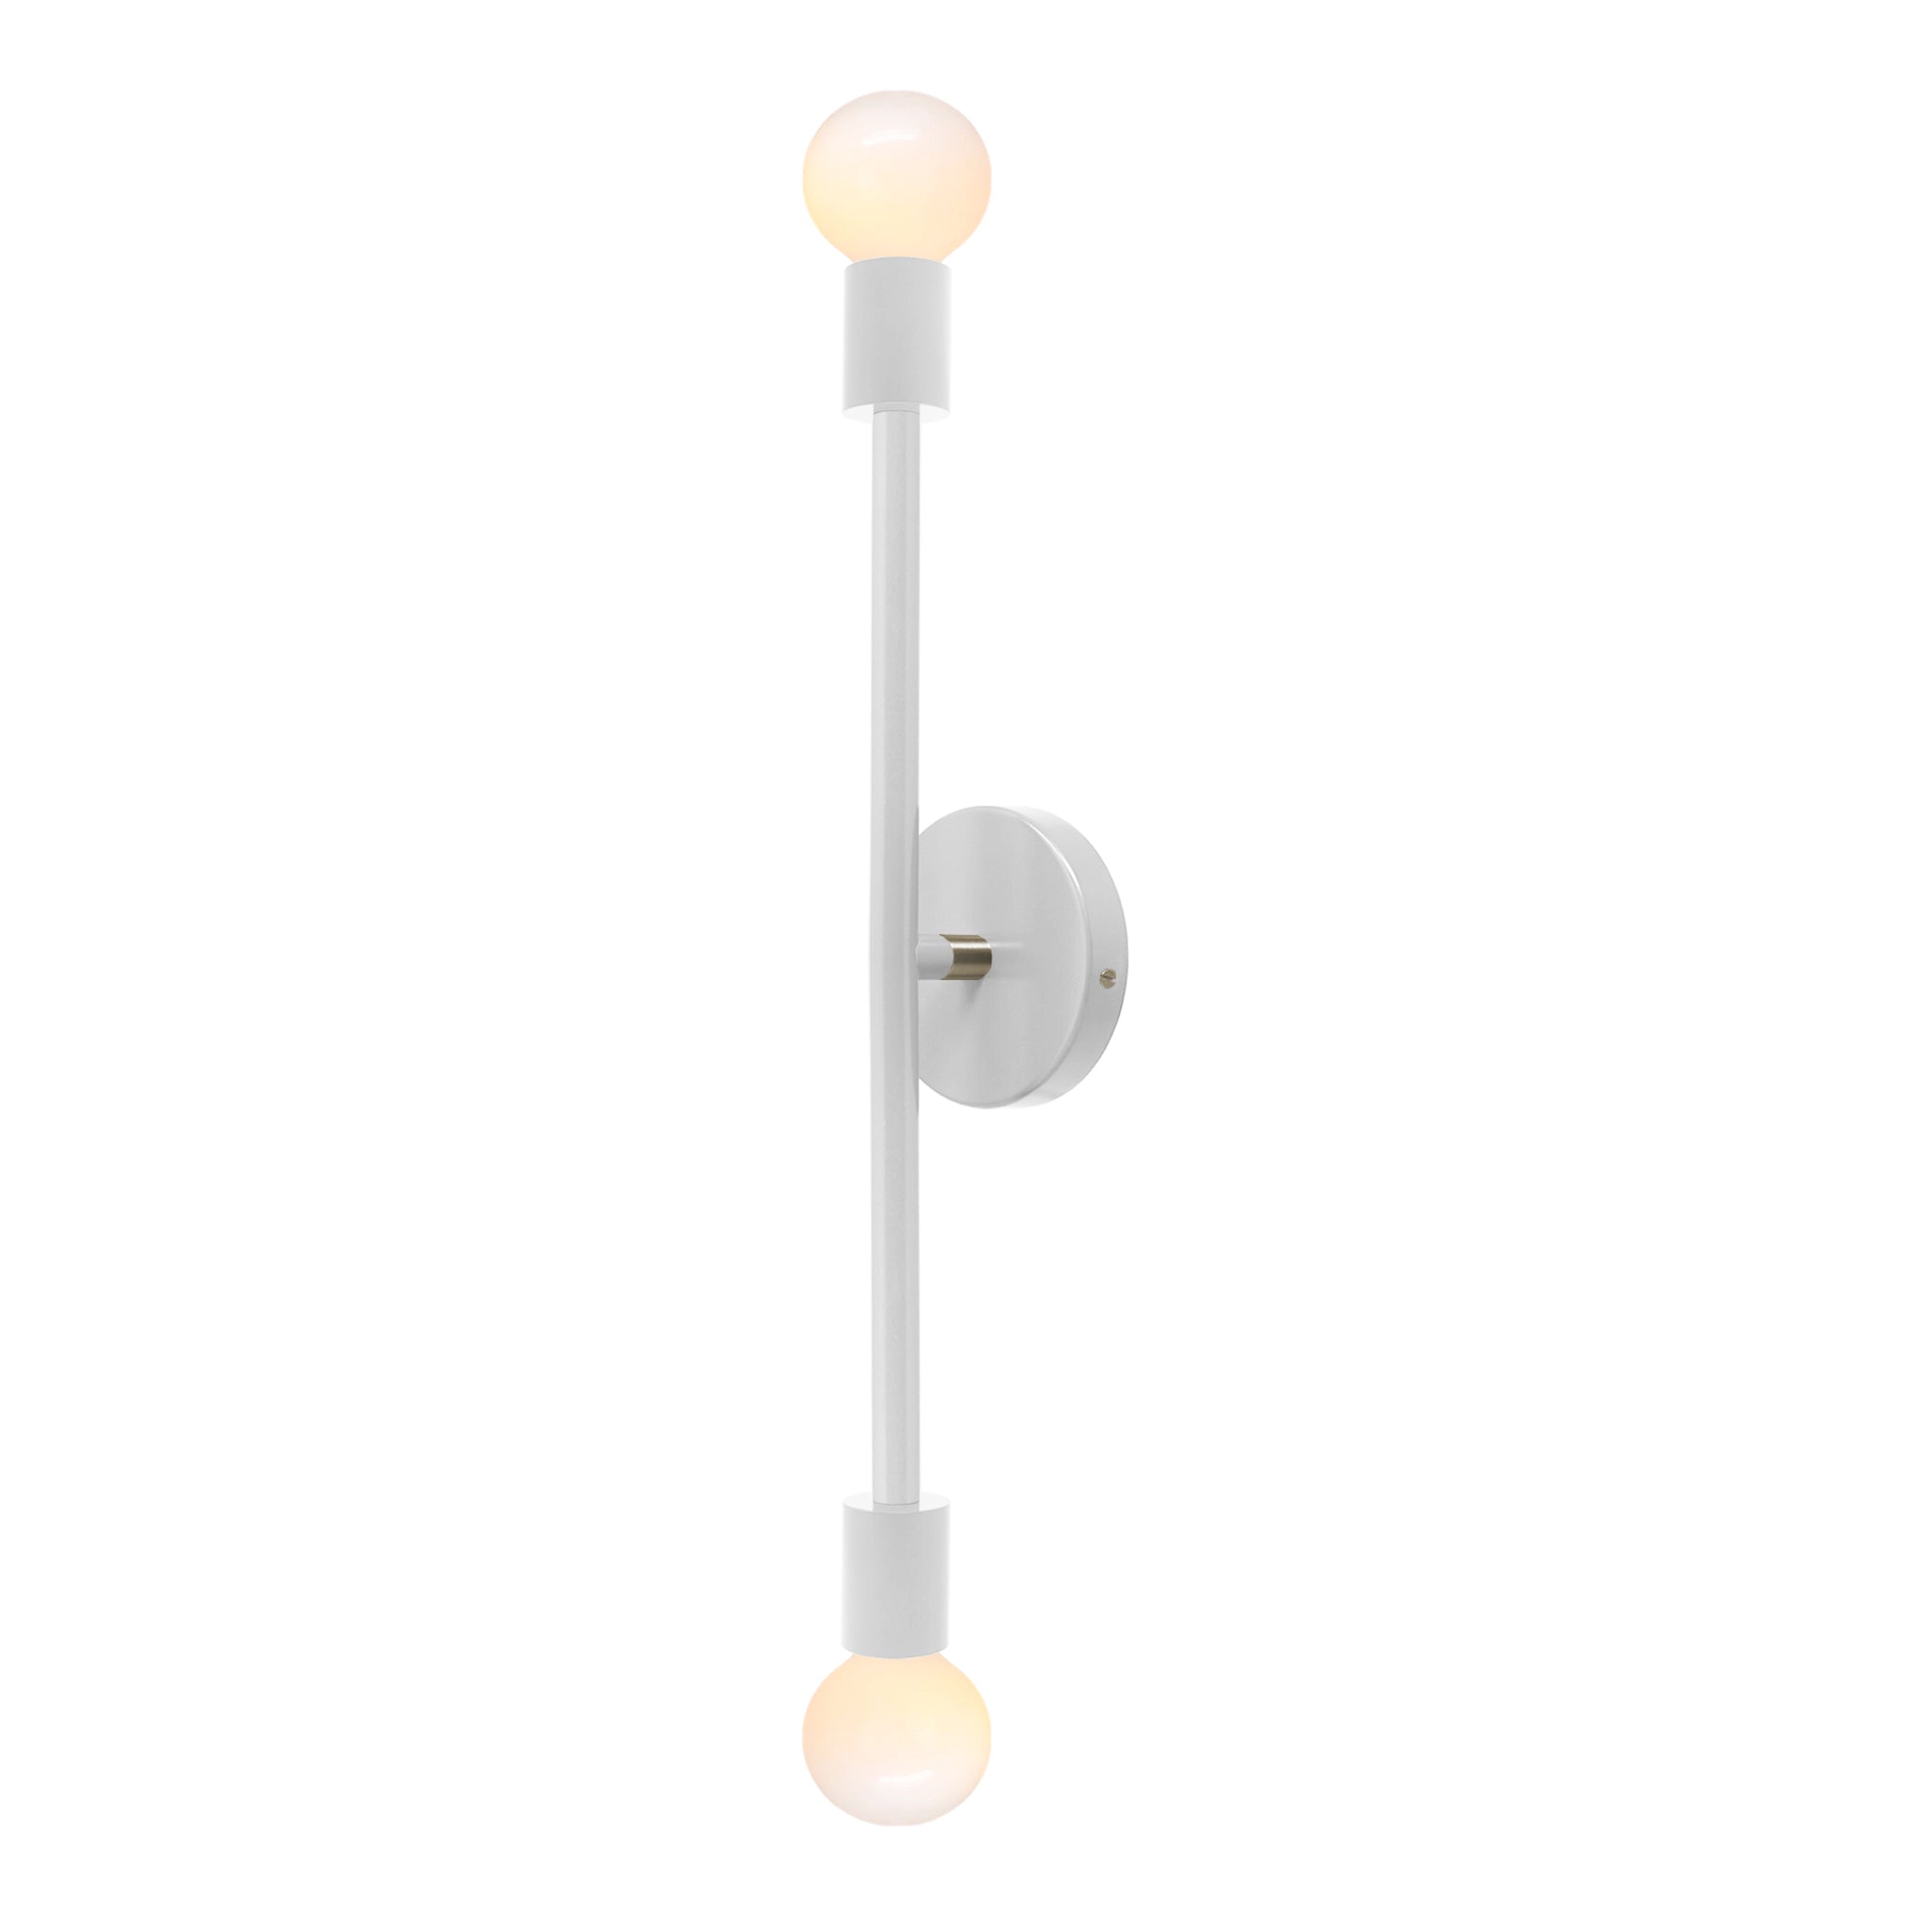 Nickel and barely color Pilot sconce 23" Dutton Brown lighting